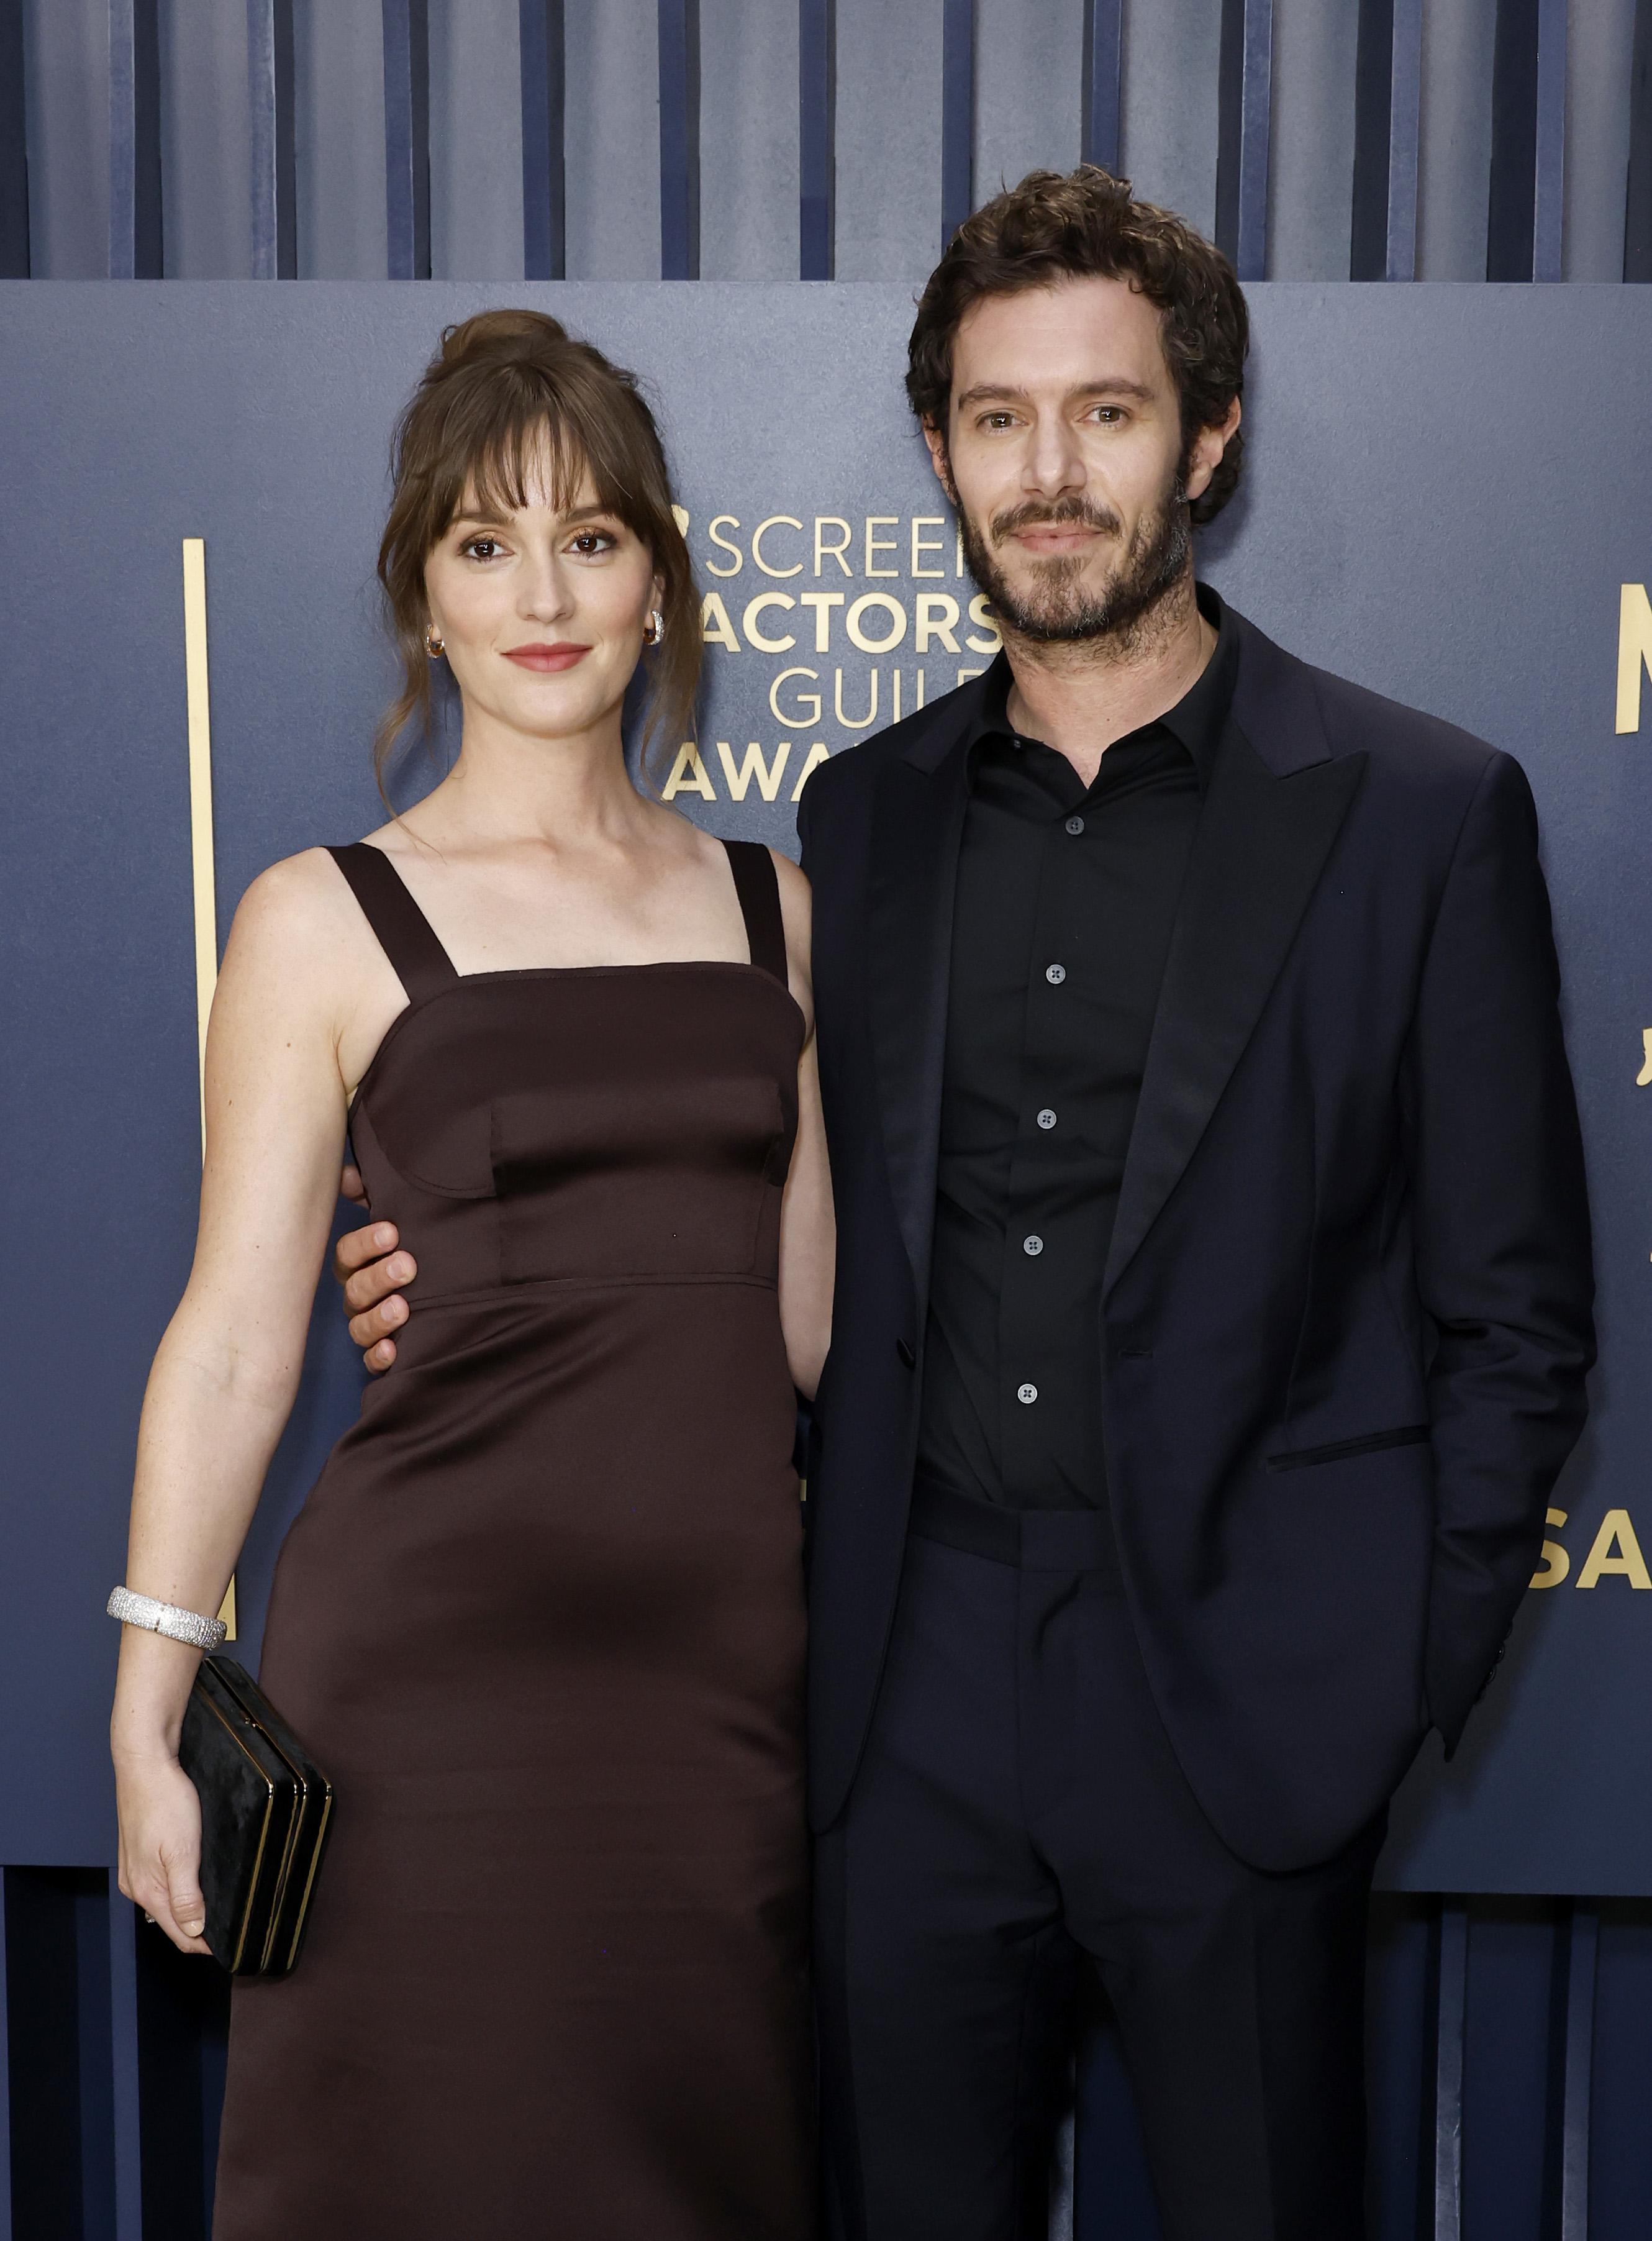 Dakota Johnson in a strapless dress with Adam Scott in a suit, posing together at the SAG Awards